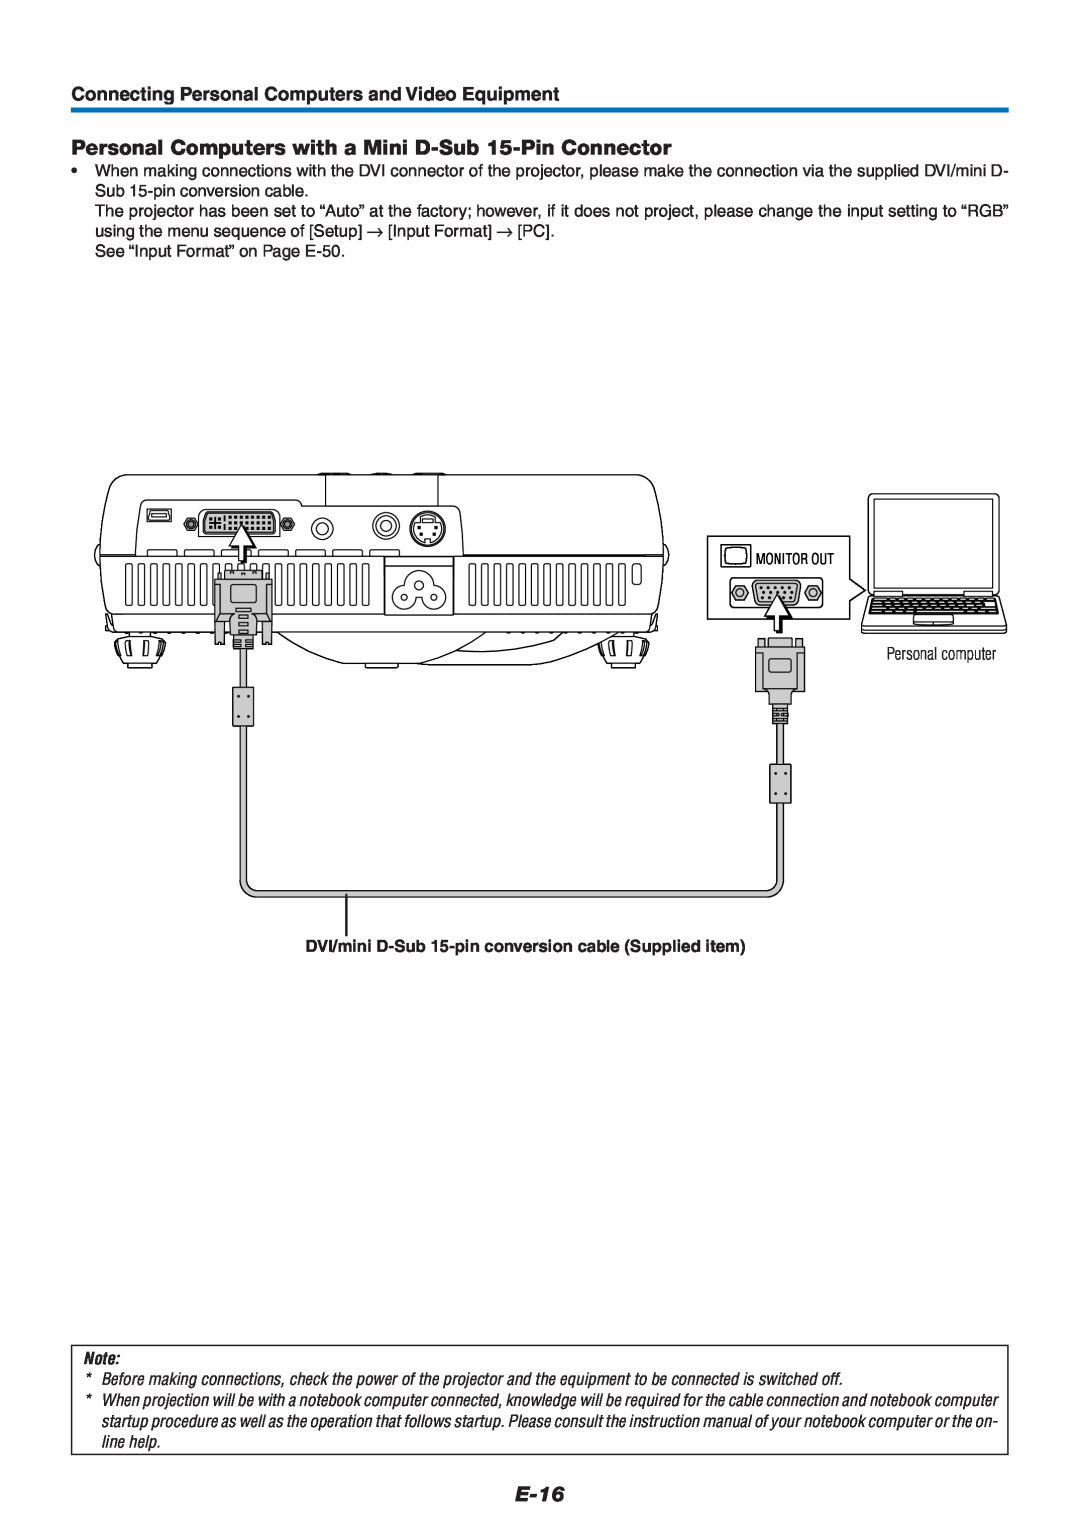 PLUS Vision U4-232 user manual Personal Computers with a Mini D-Sub 15-Pin Connector, E-16 